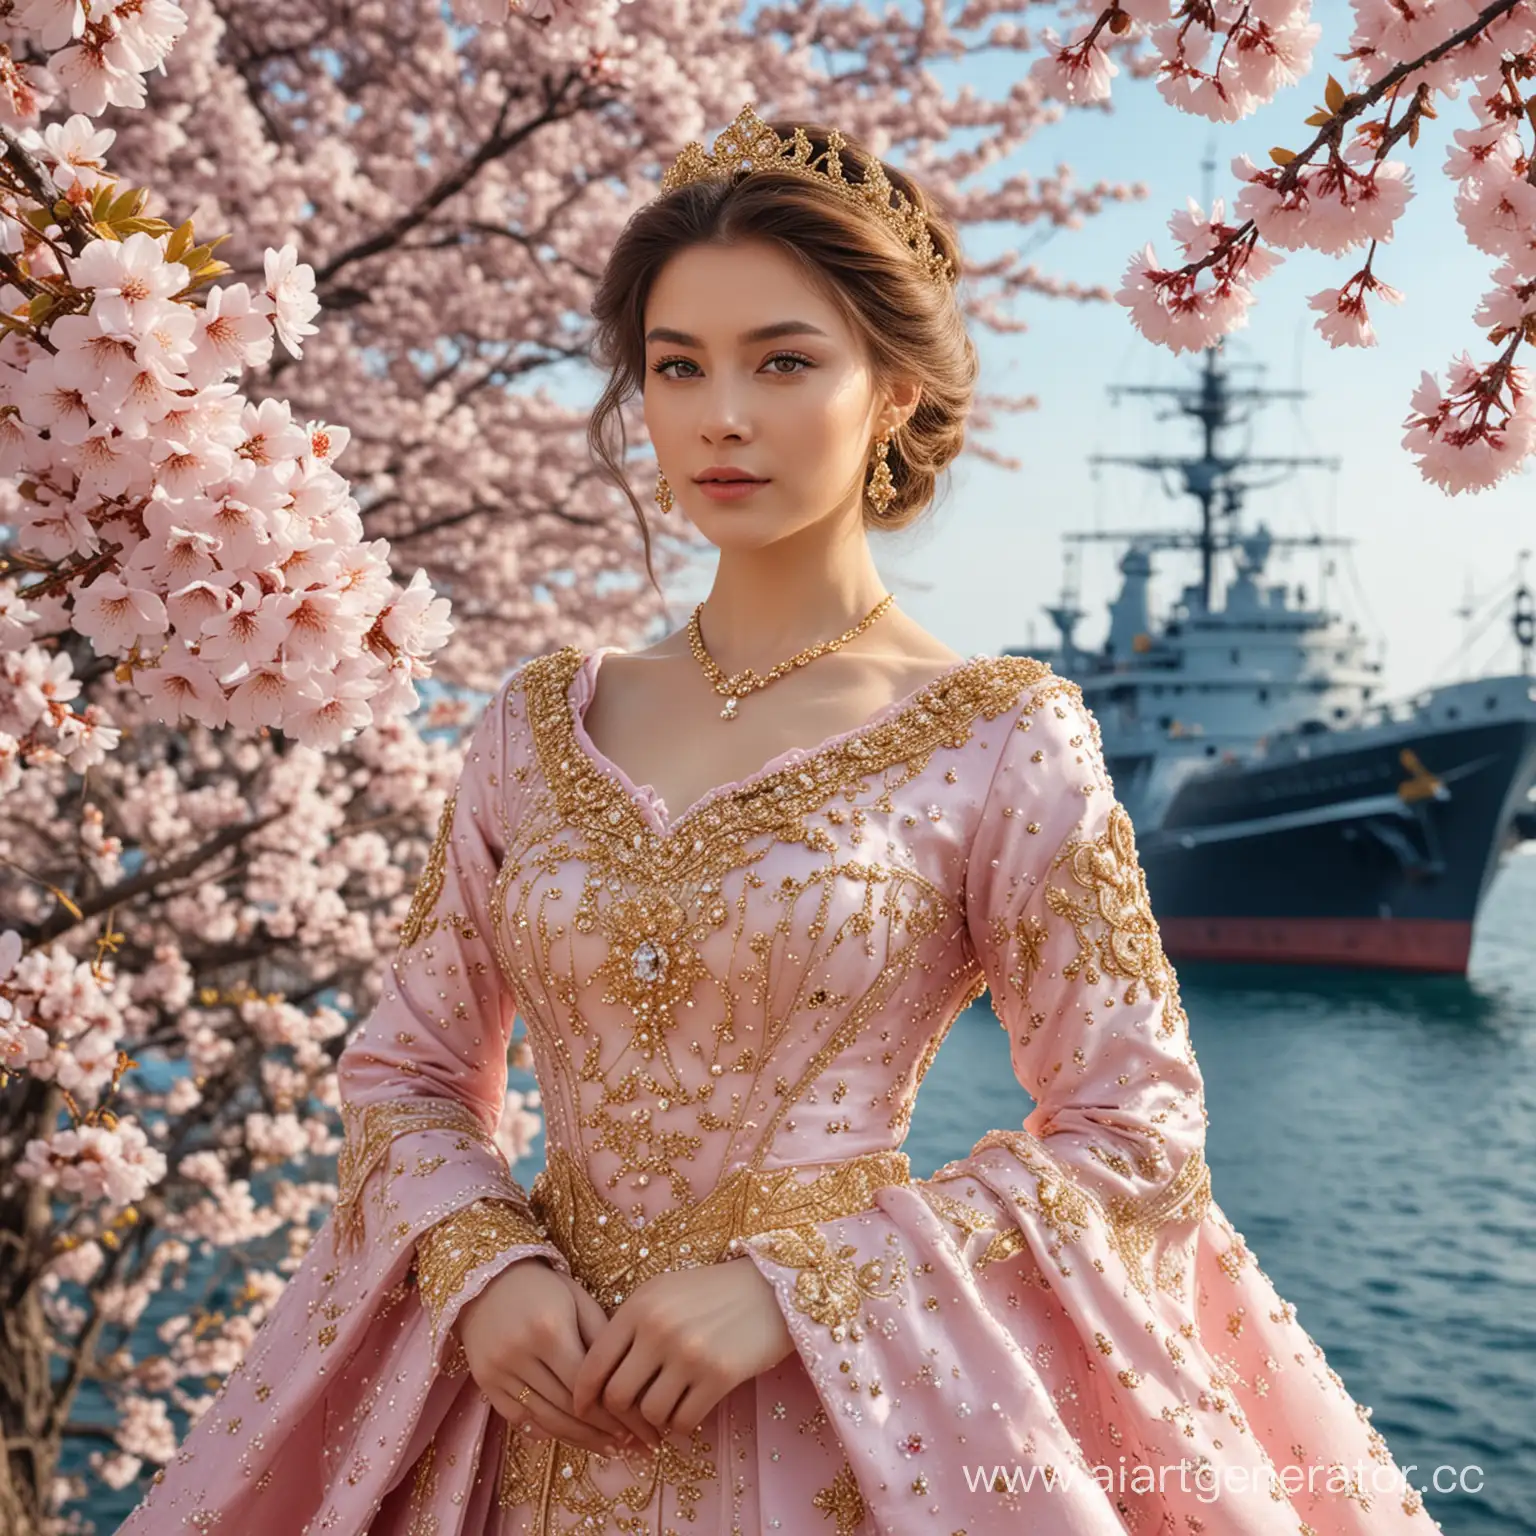 Elegant-Alina-Adorned-in-Royal-Attire-Amidst-Blossoming-Sakura-Trees-and-a-Majestic-Frigate